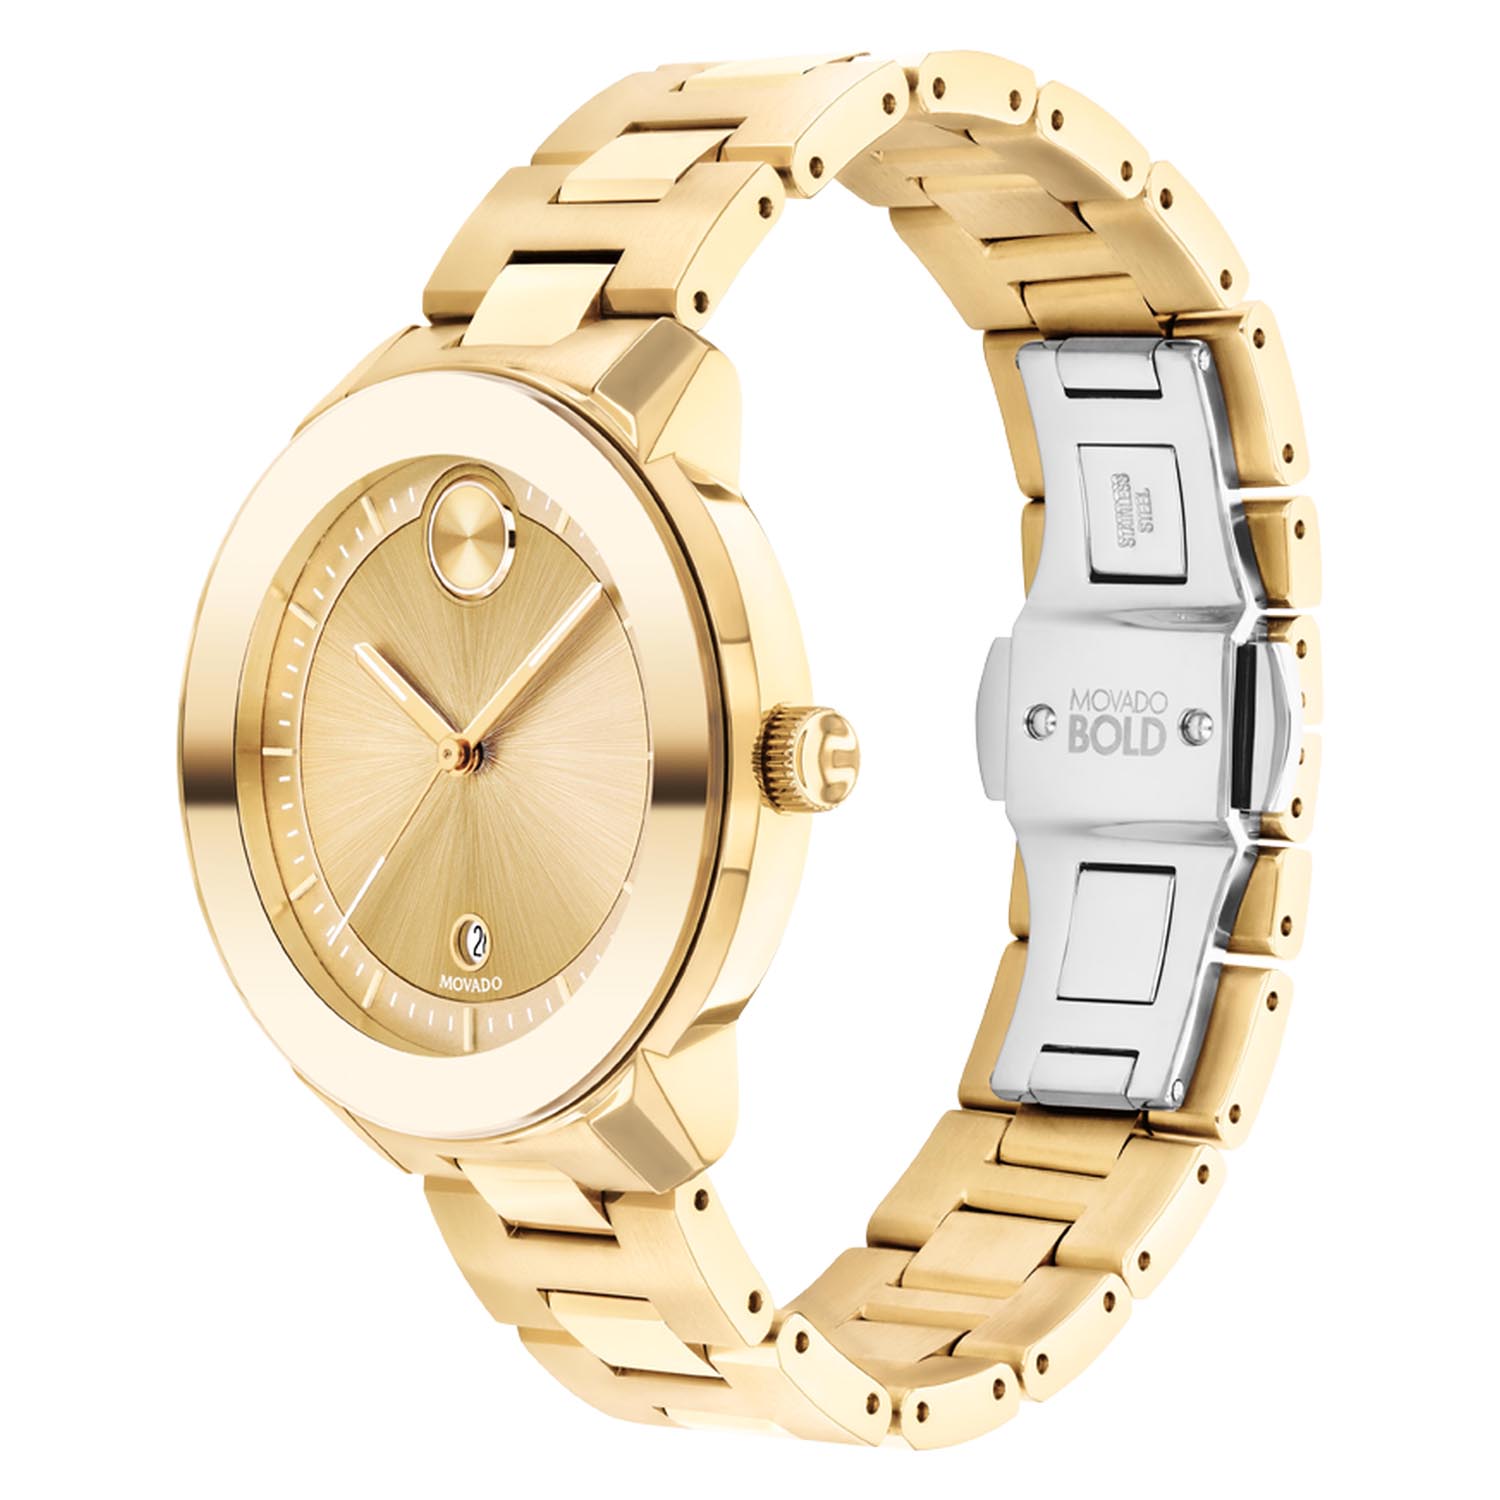 Movado Bold Verso Womens Watch with Yellow Gold Tone Dial and Yellow Gold Ion Plated Stainless Steel Band (Swiss quartz movement)